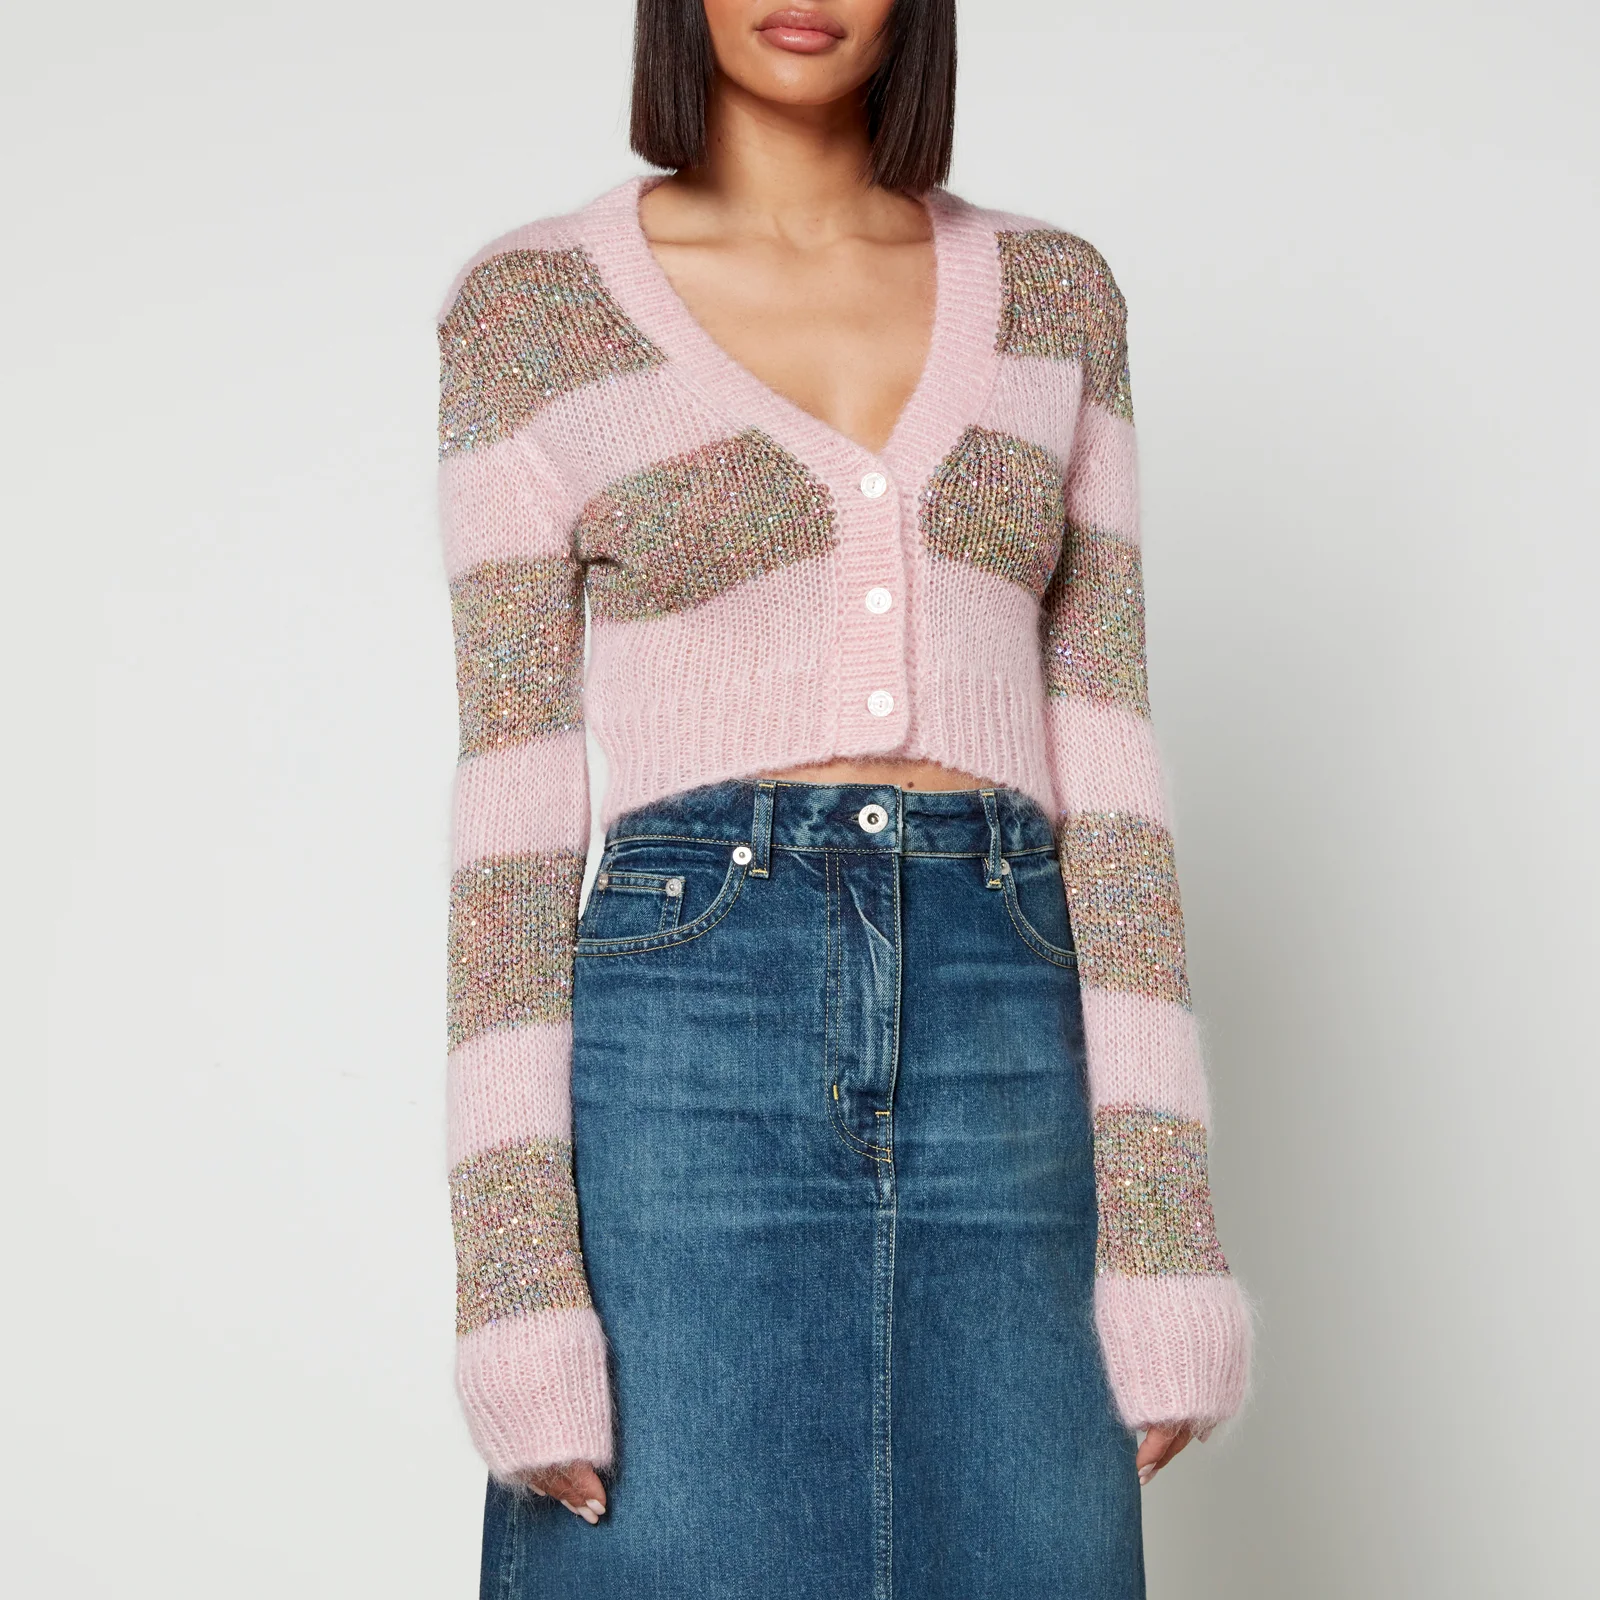 Marni Cropped Sequined Striped Knitted Cardigan Image 1